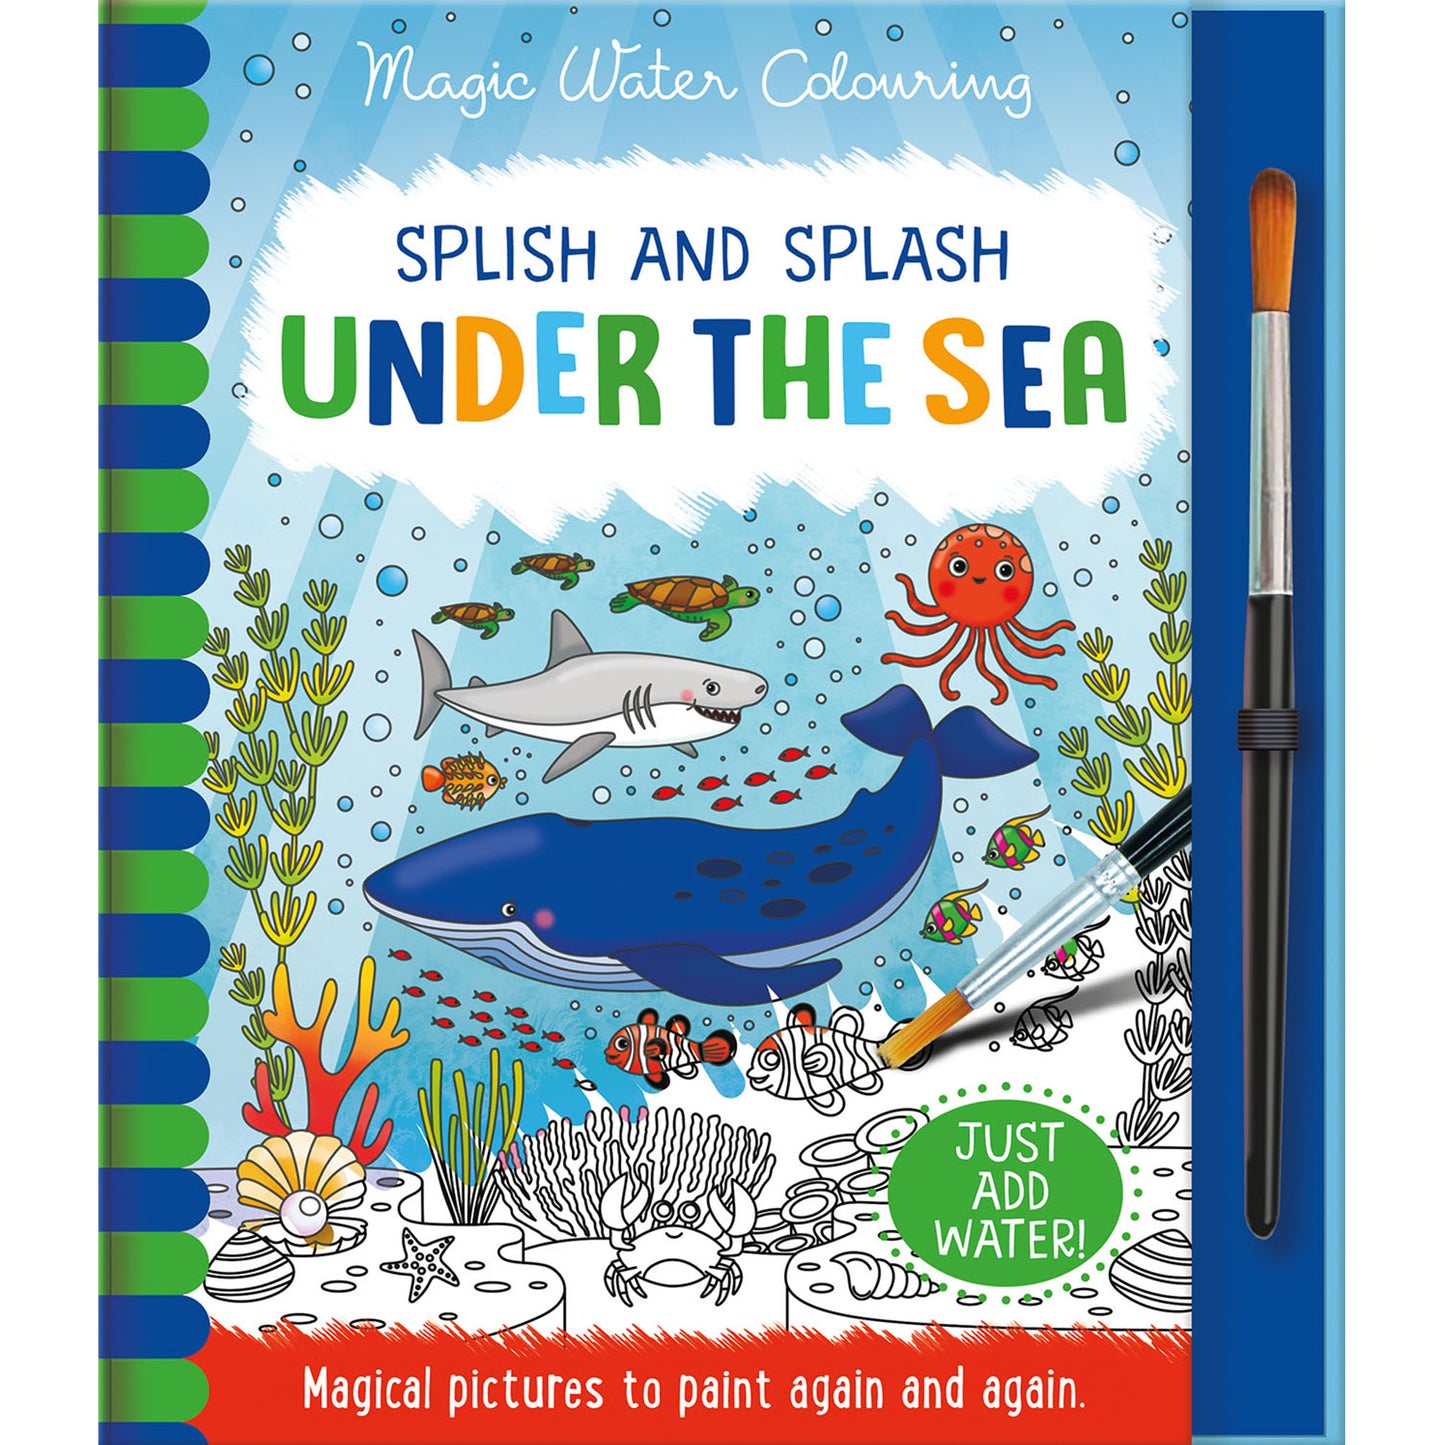 Under the Sea Magic Water Colouring